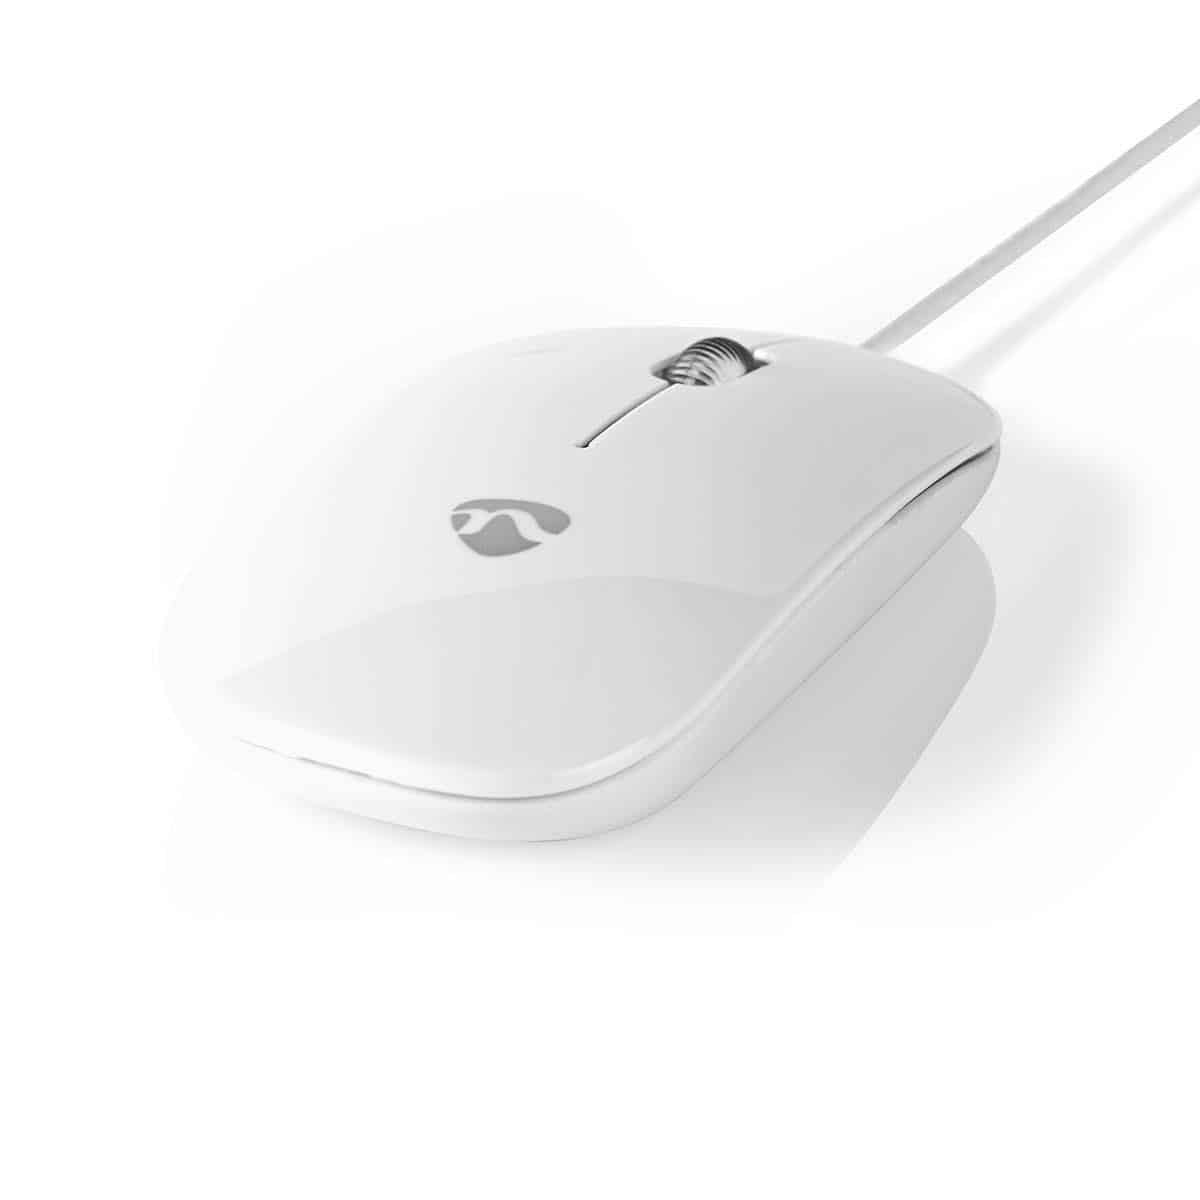 Nedis Wired Mouse 1000dpi – Both Handed